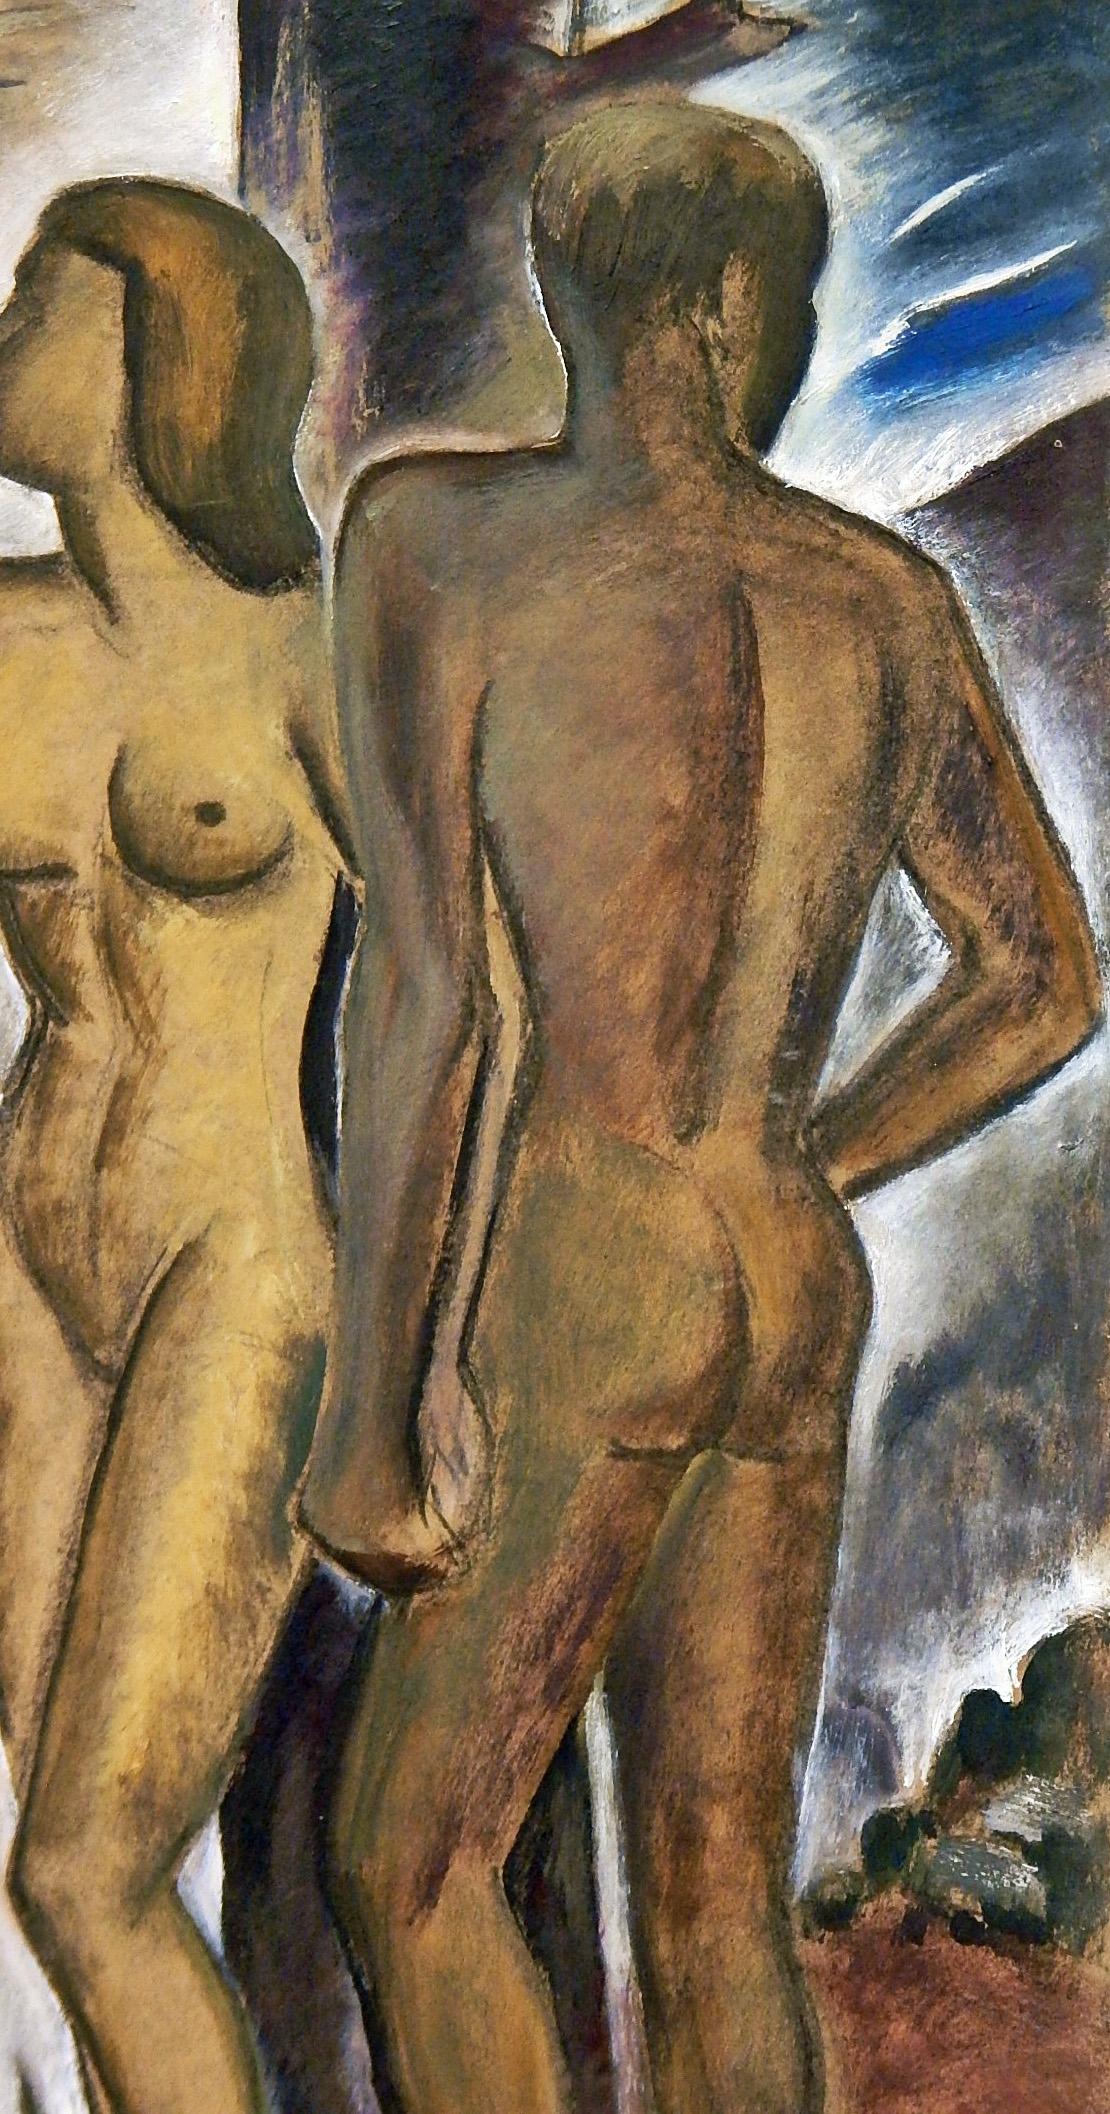 Reminiscent of the work of Marguerite Zorach and other masters of Modern American painting, this striking depiction by Virginia True of a nude couple, male and female holding hands, is set in a moonlit scene with a tall waterfall and scudding clouds